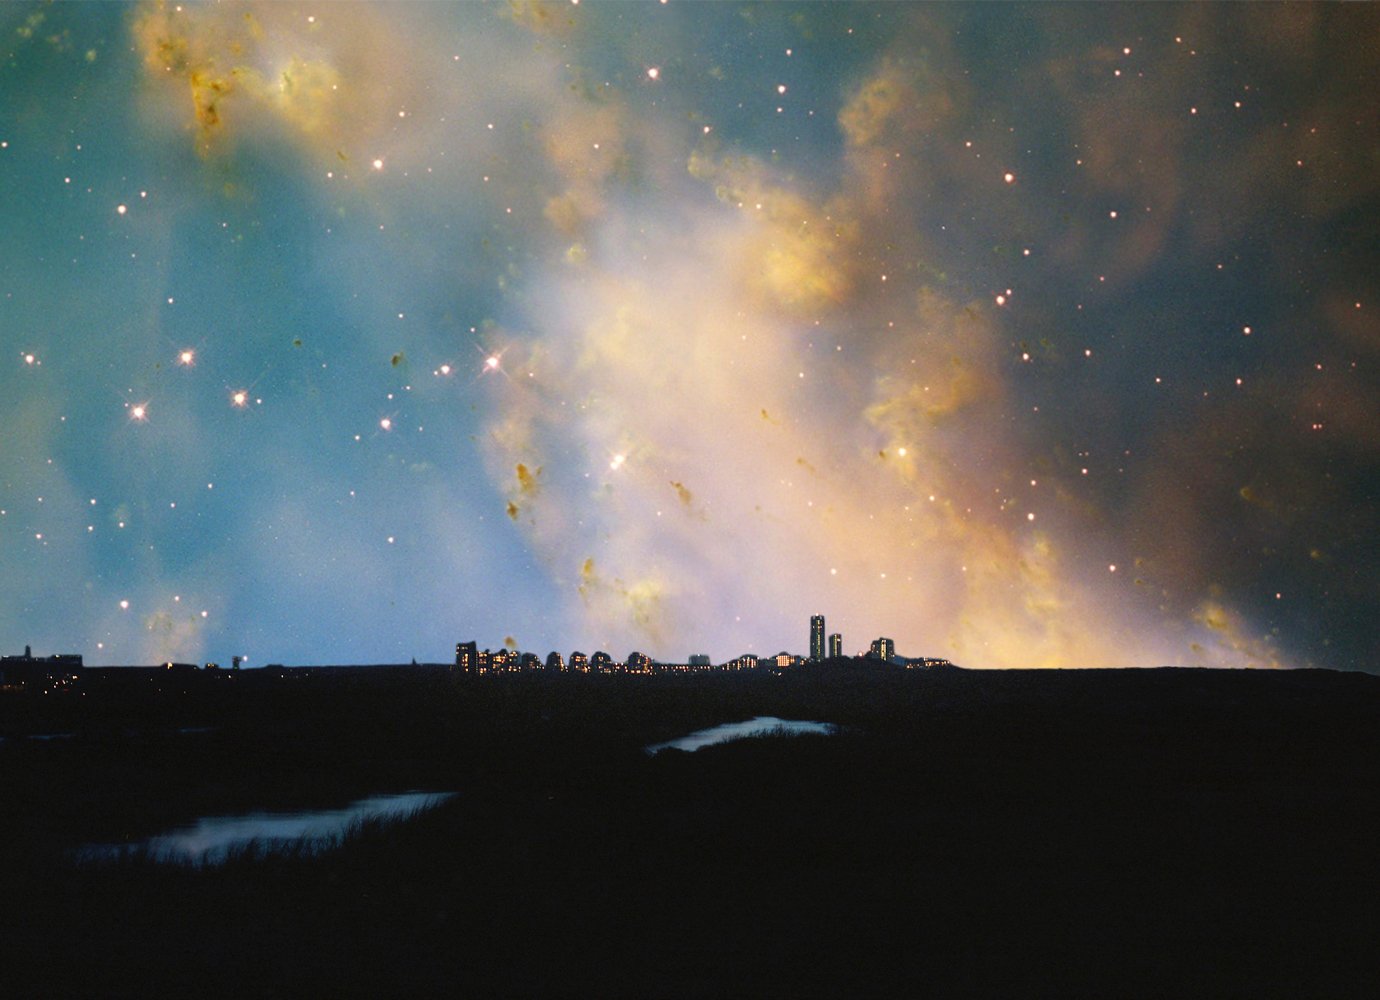 Falling for the stars: why one Polish photographer wants us to look at the night sky with awe